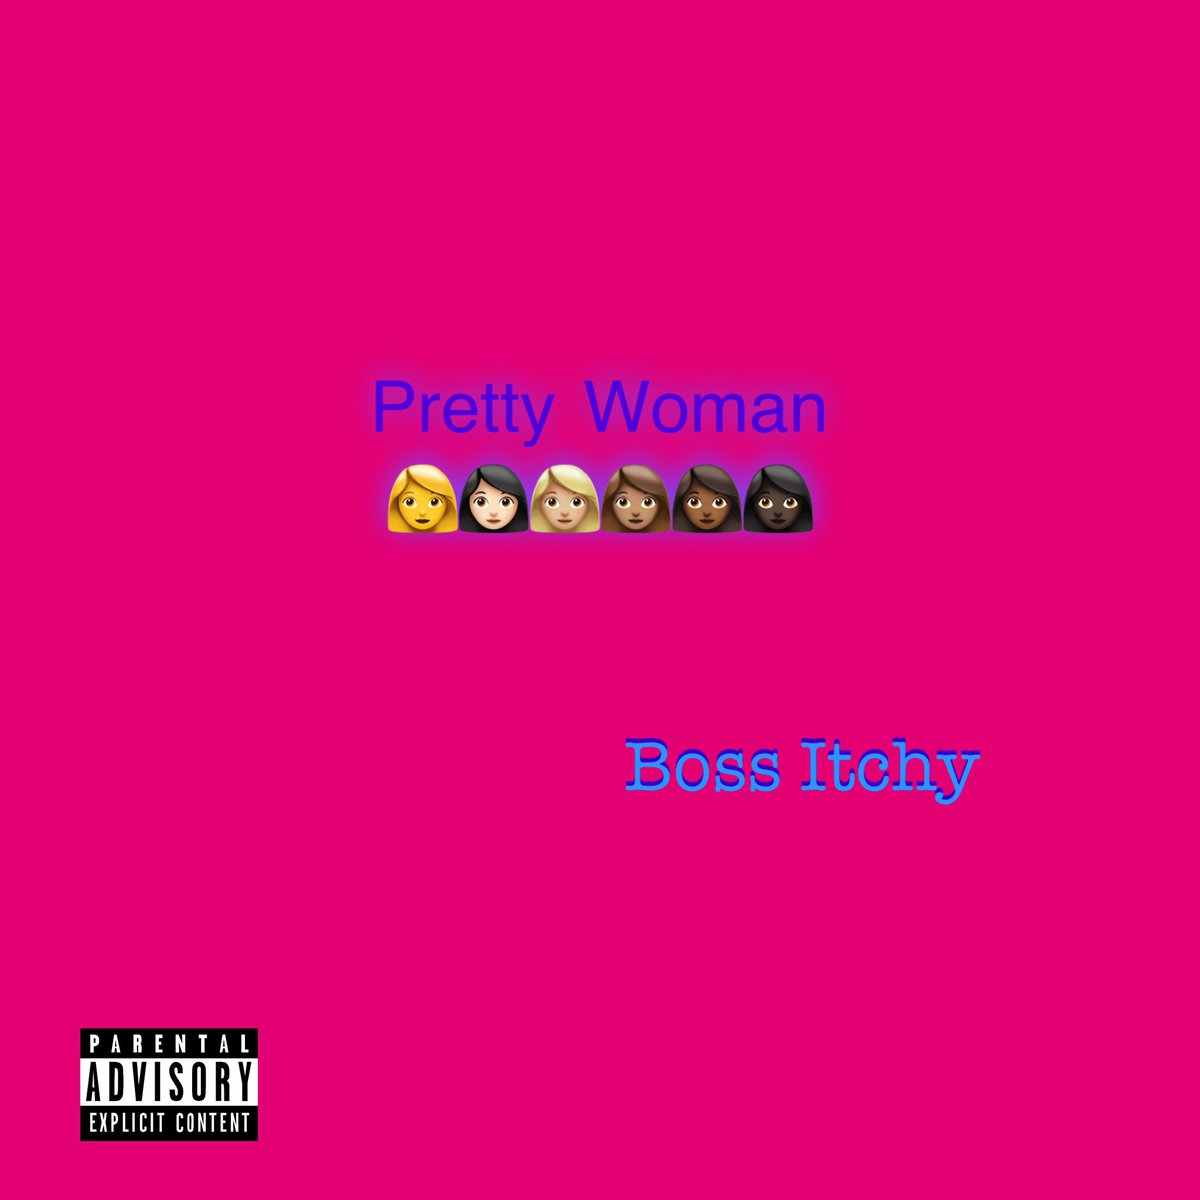 I’m working on some new heat 🎶🎶🔥🔥🔜 for all the #PrettyWomen 😍🤫🫨